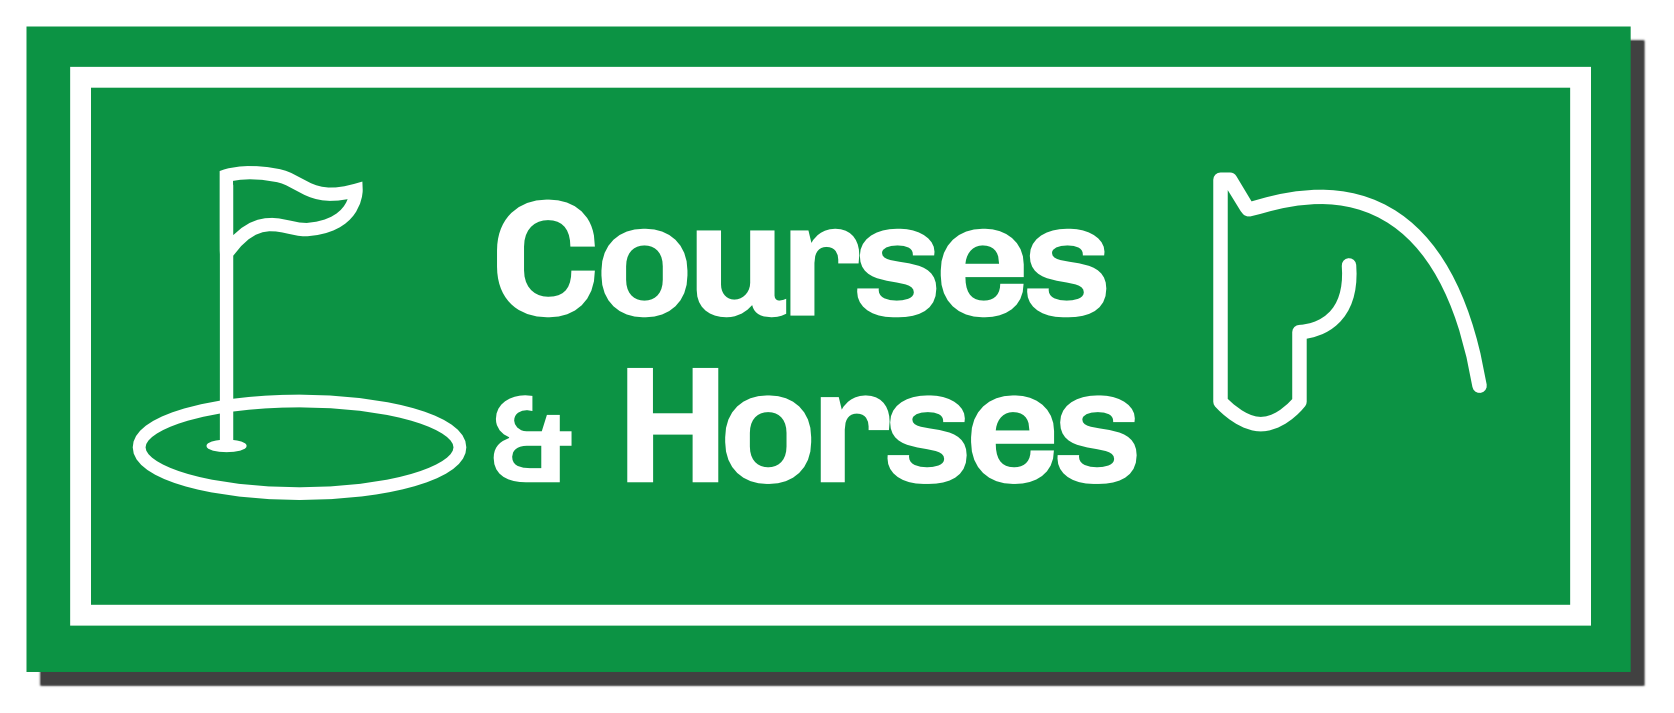 Courses and Horses